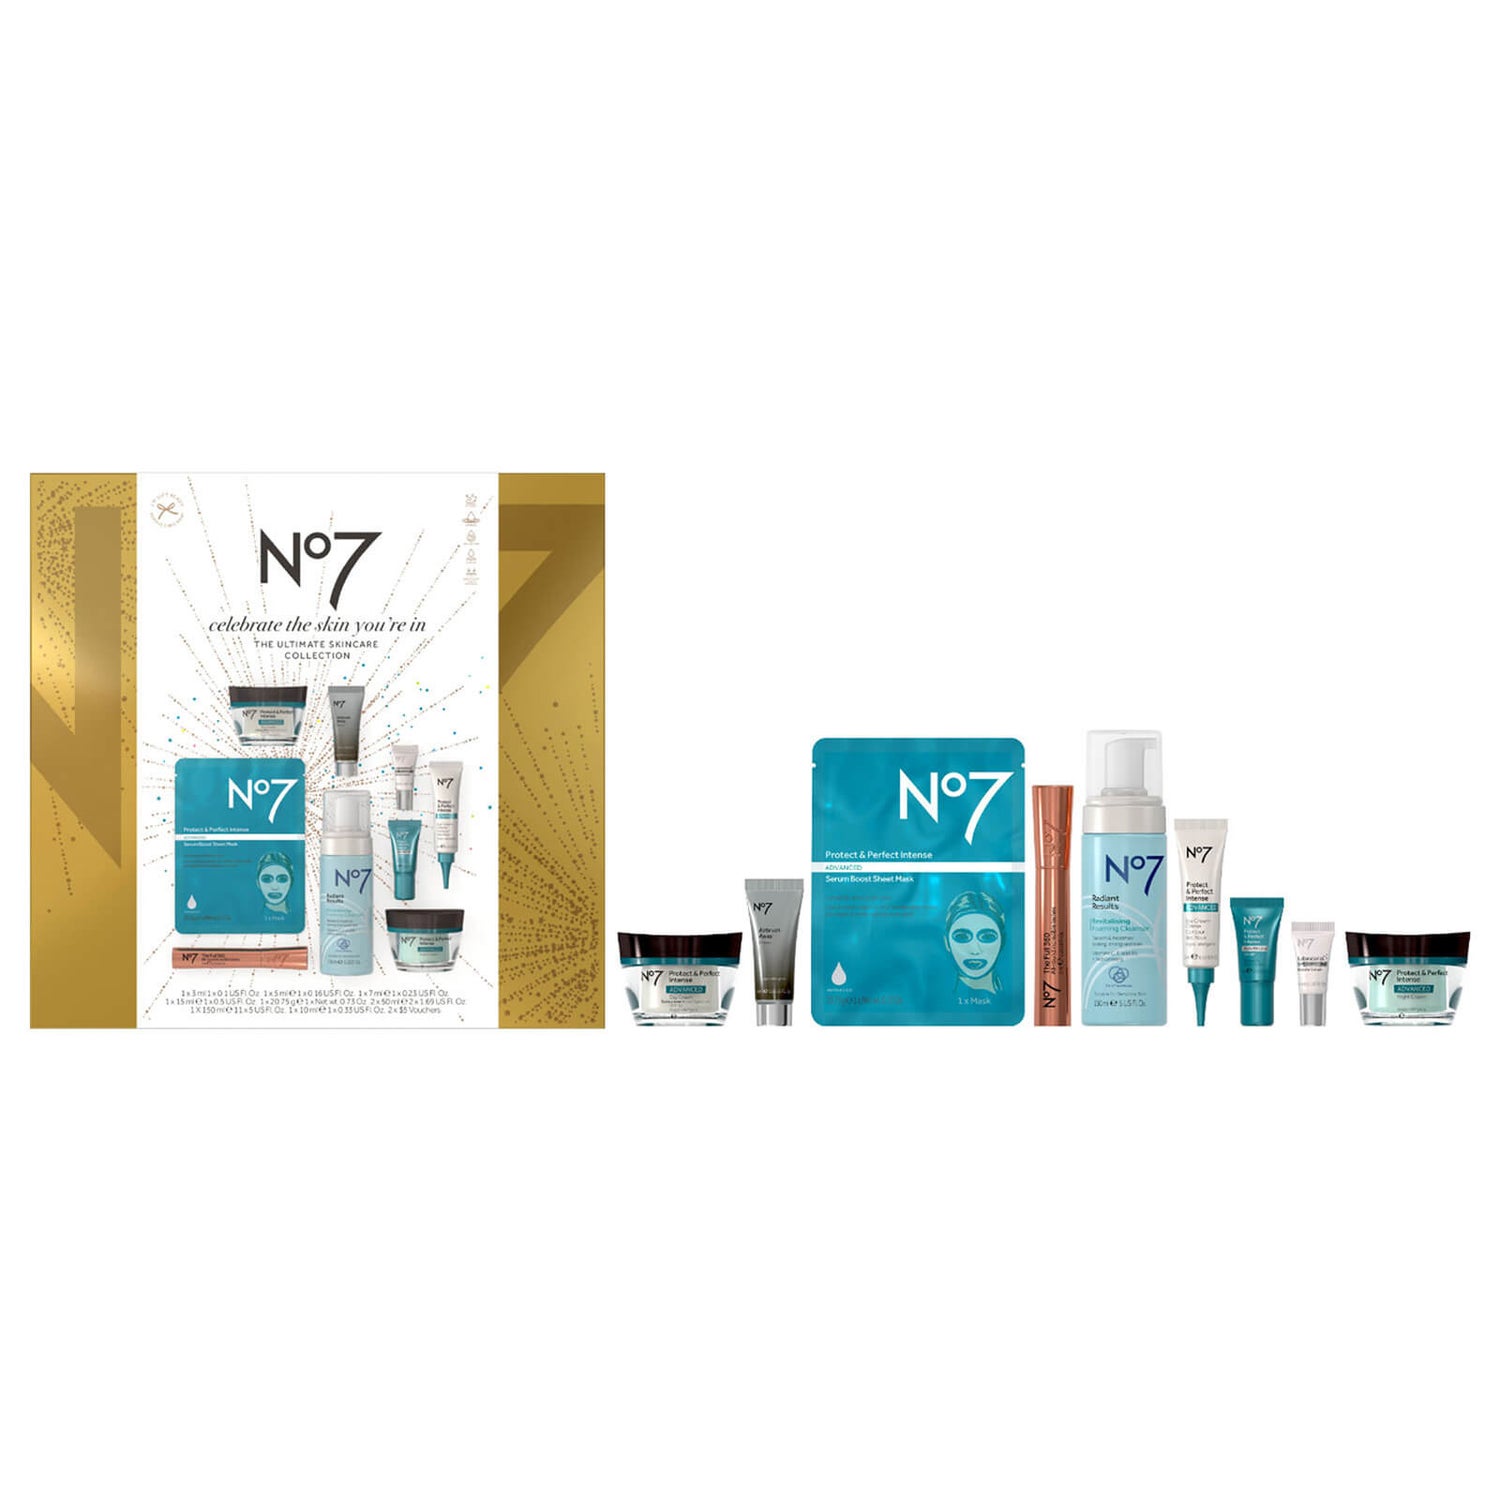 No7 Celebrate the Skin You're In - The Ultimate Skincare Collection